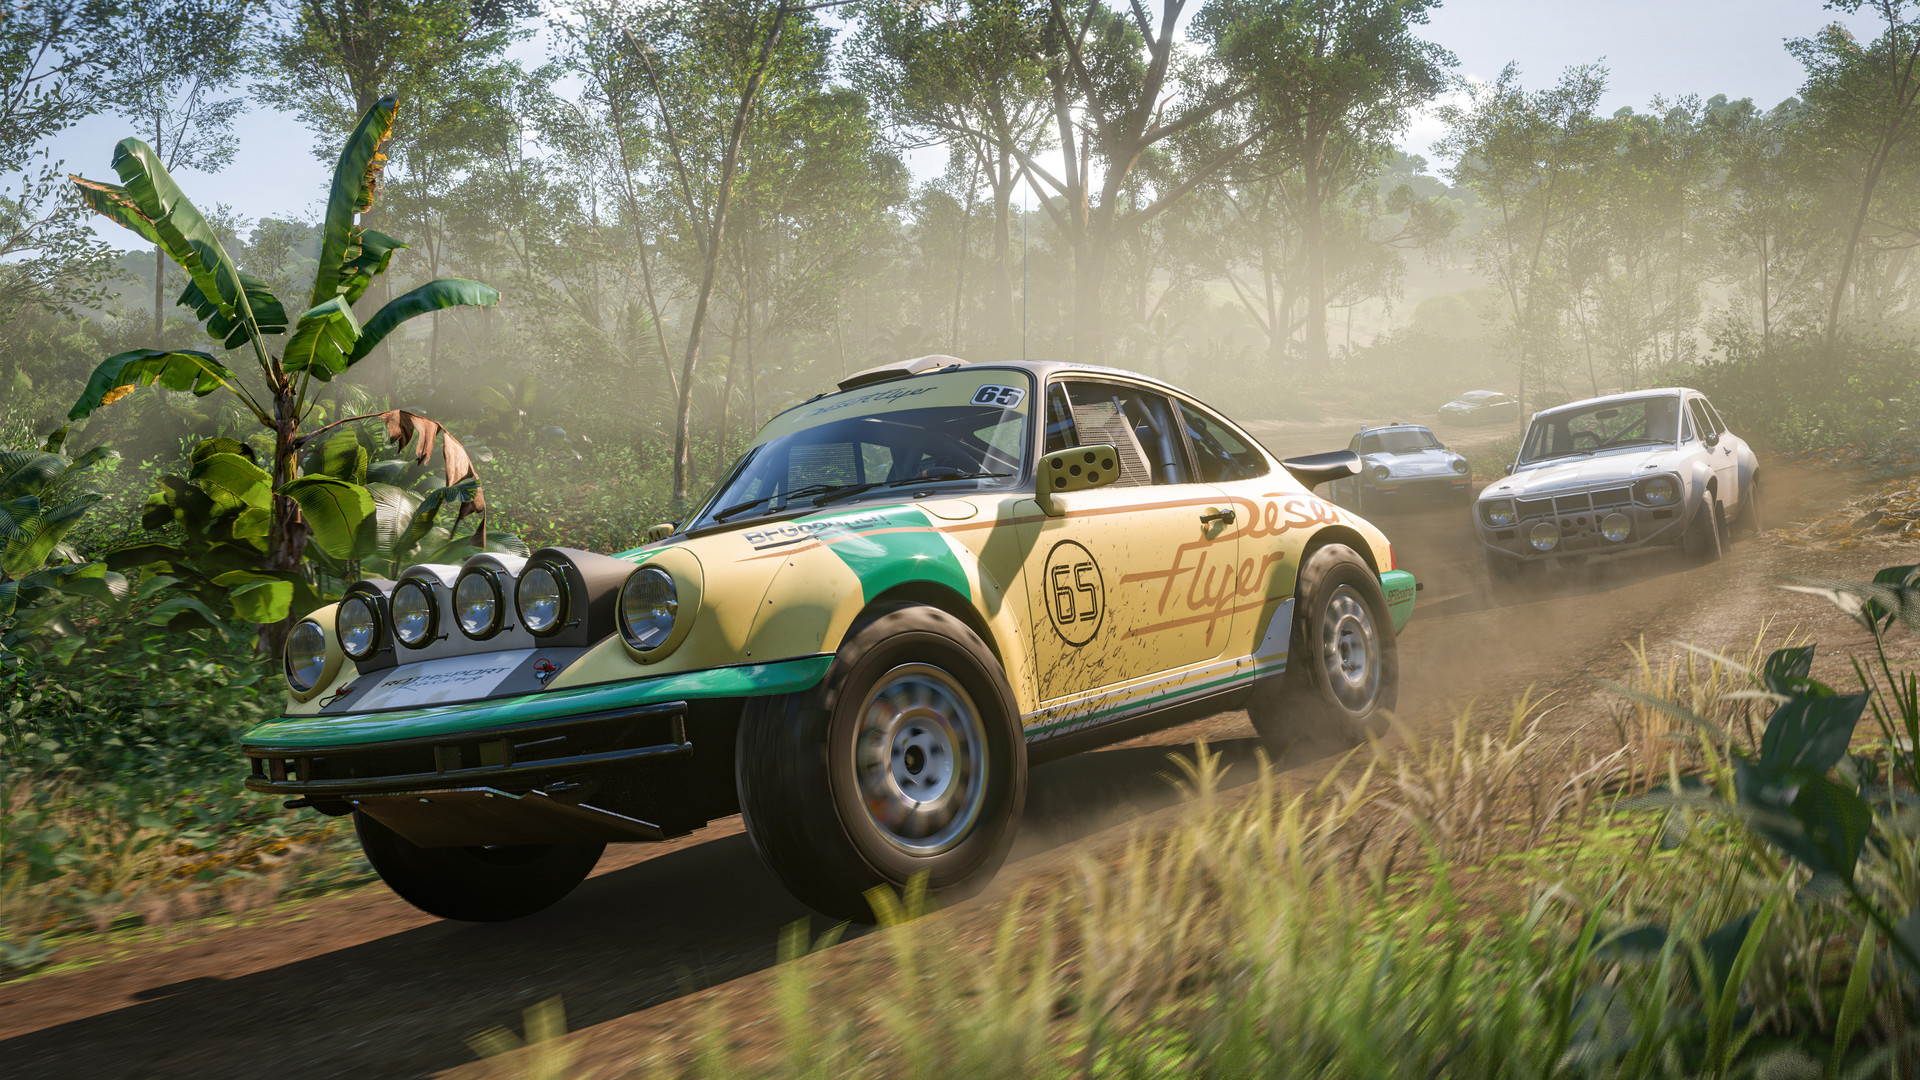 Forza Horizon 4 graphics performance: How to get the best settings